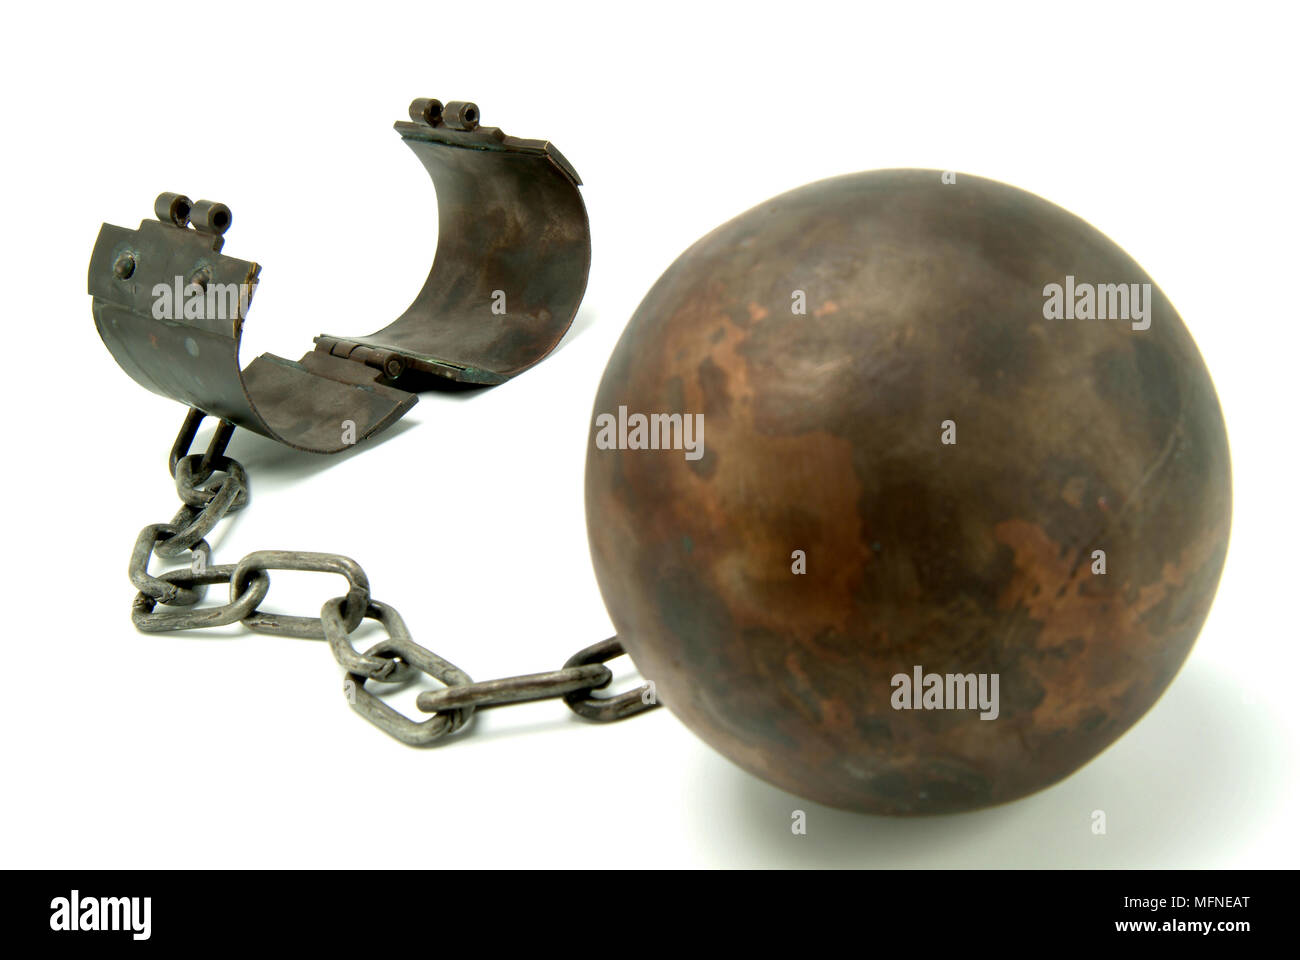 Close-up of a ball and chain shackle   Ref: CRB117 10024 106  Compulsory Credit: David Barrett / Photoshot Stock Photo